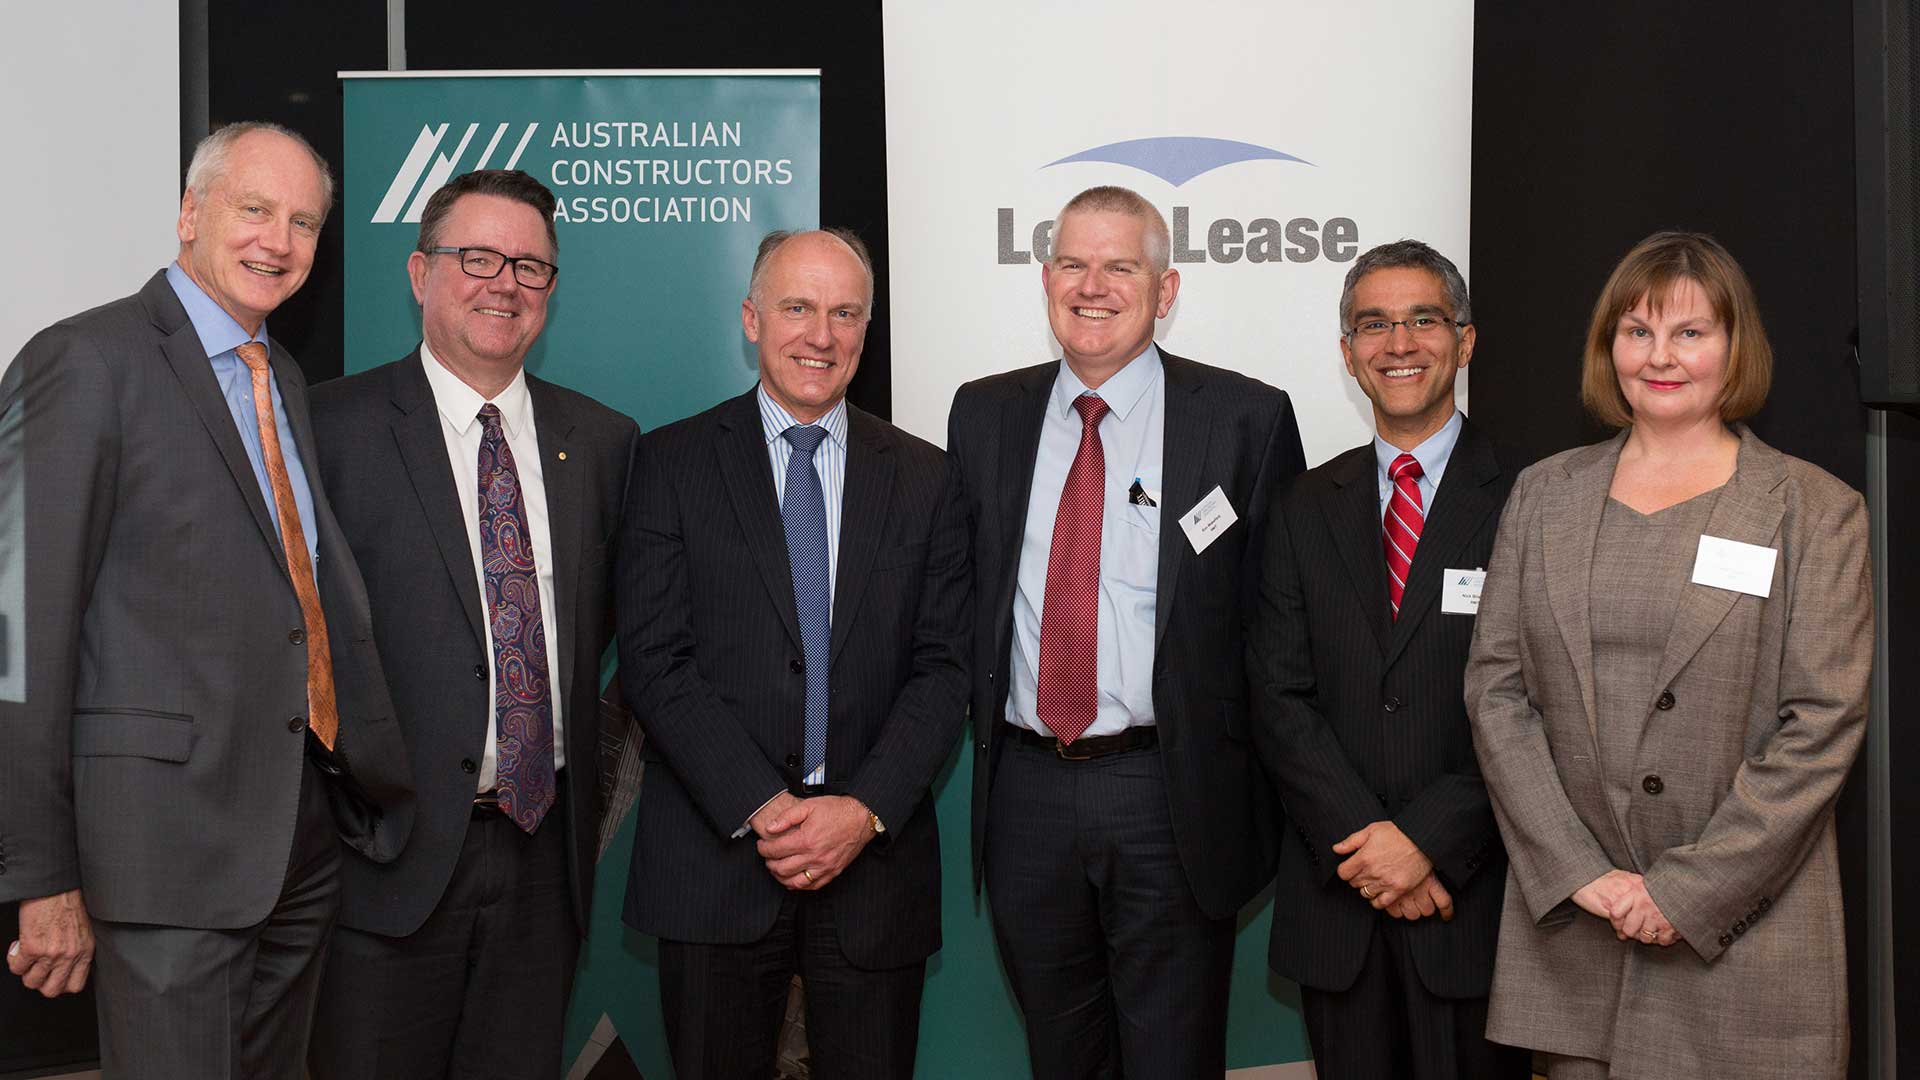 The Australian Constructors Association released reports on safety in design and health and safety culture on 7 August 2014. Pictured (l-r): David Saxelby (ACA Vice President, Chief Executive of Lendlease Construction and Infrastructure Australia), Murray Coleman (Chair, ACA Board Safety Committee, Managing Director of Lendlease Building), Senator Eric Abetz (Leader of the Government in The Senate, Minister for Employment, Minister Assisting the Prime Minister for the Public Service), Prof. Ron Wakefield (RMIT), Prof. Nick Blismas (RMIT), Dist. Prof. Helen Lingard (RMIT).